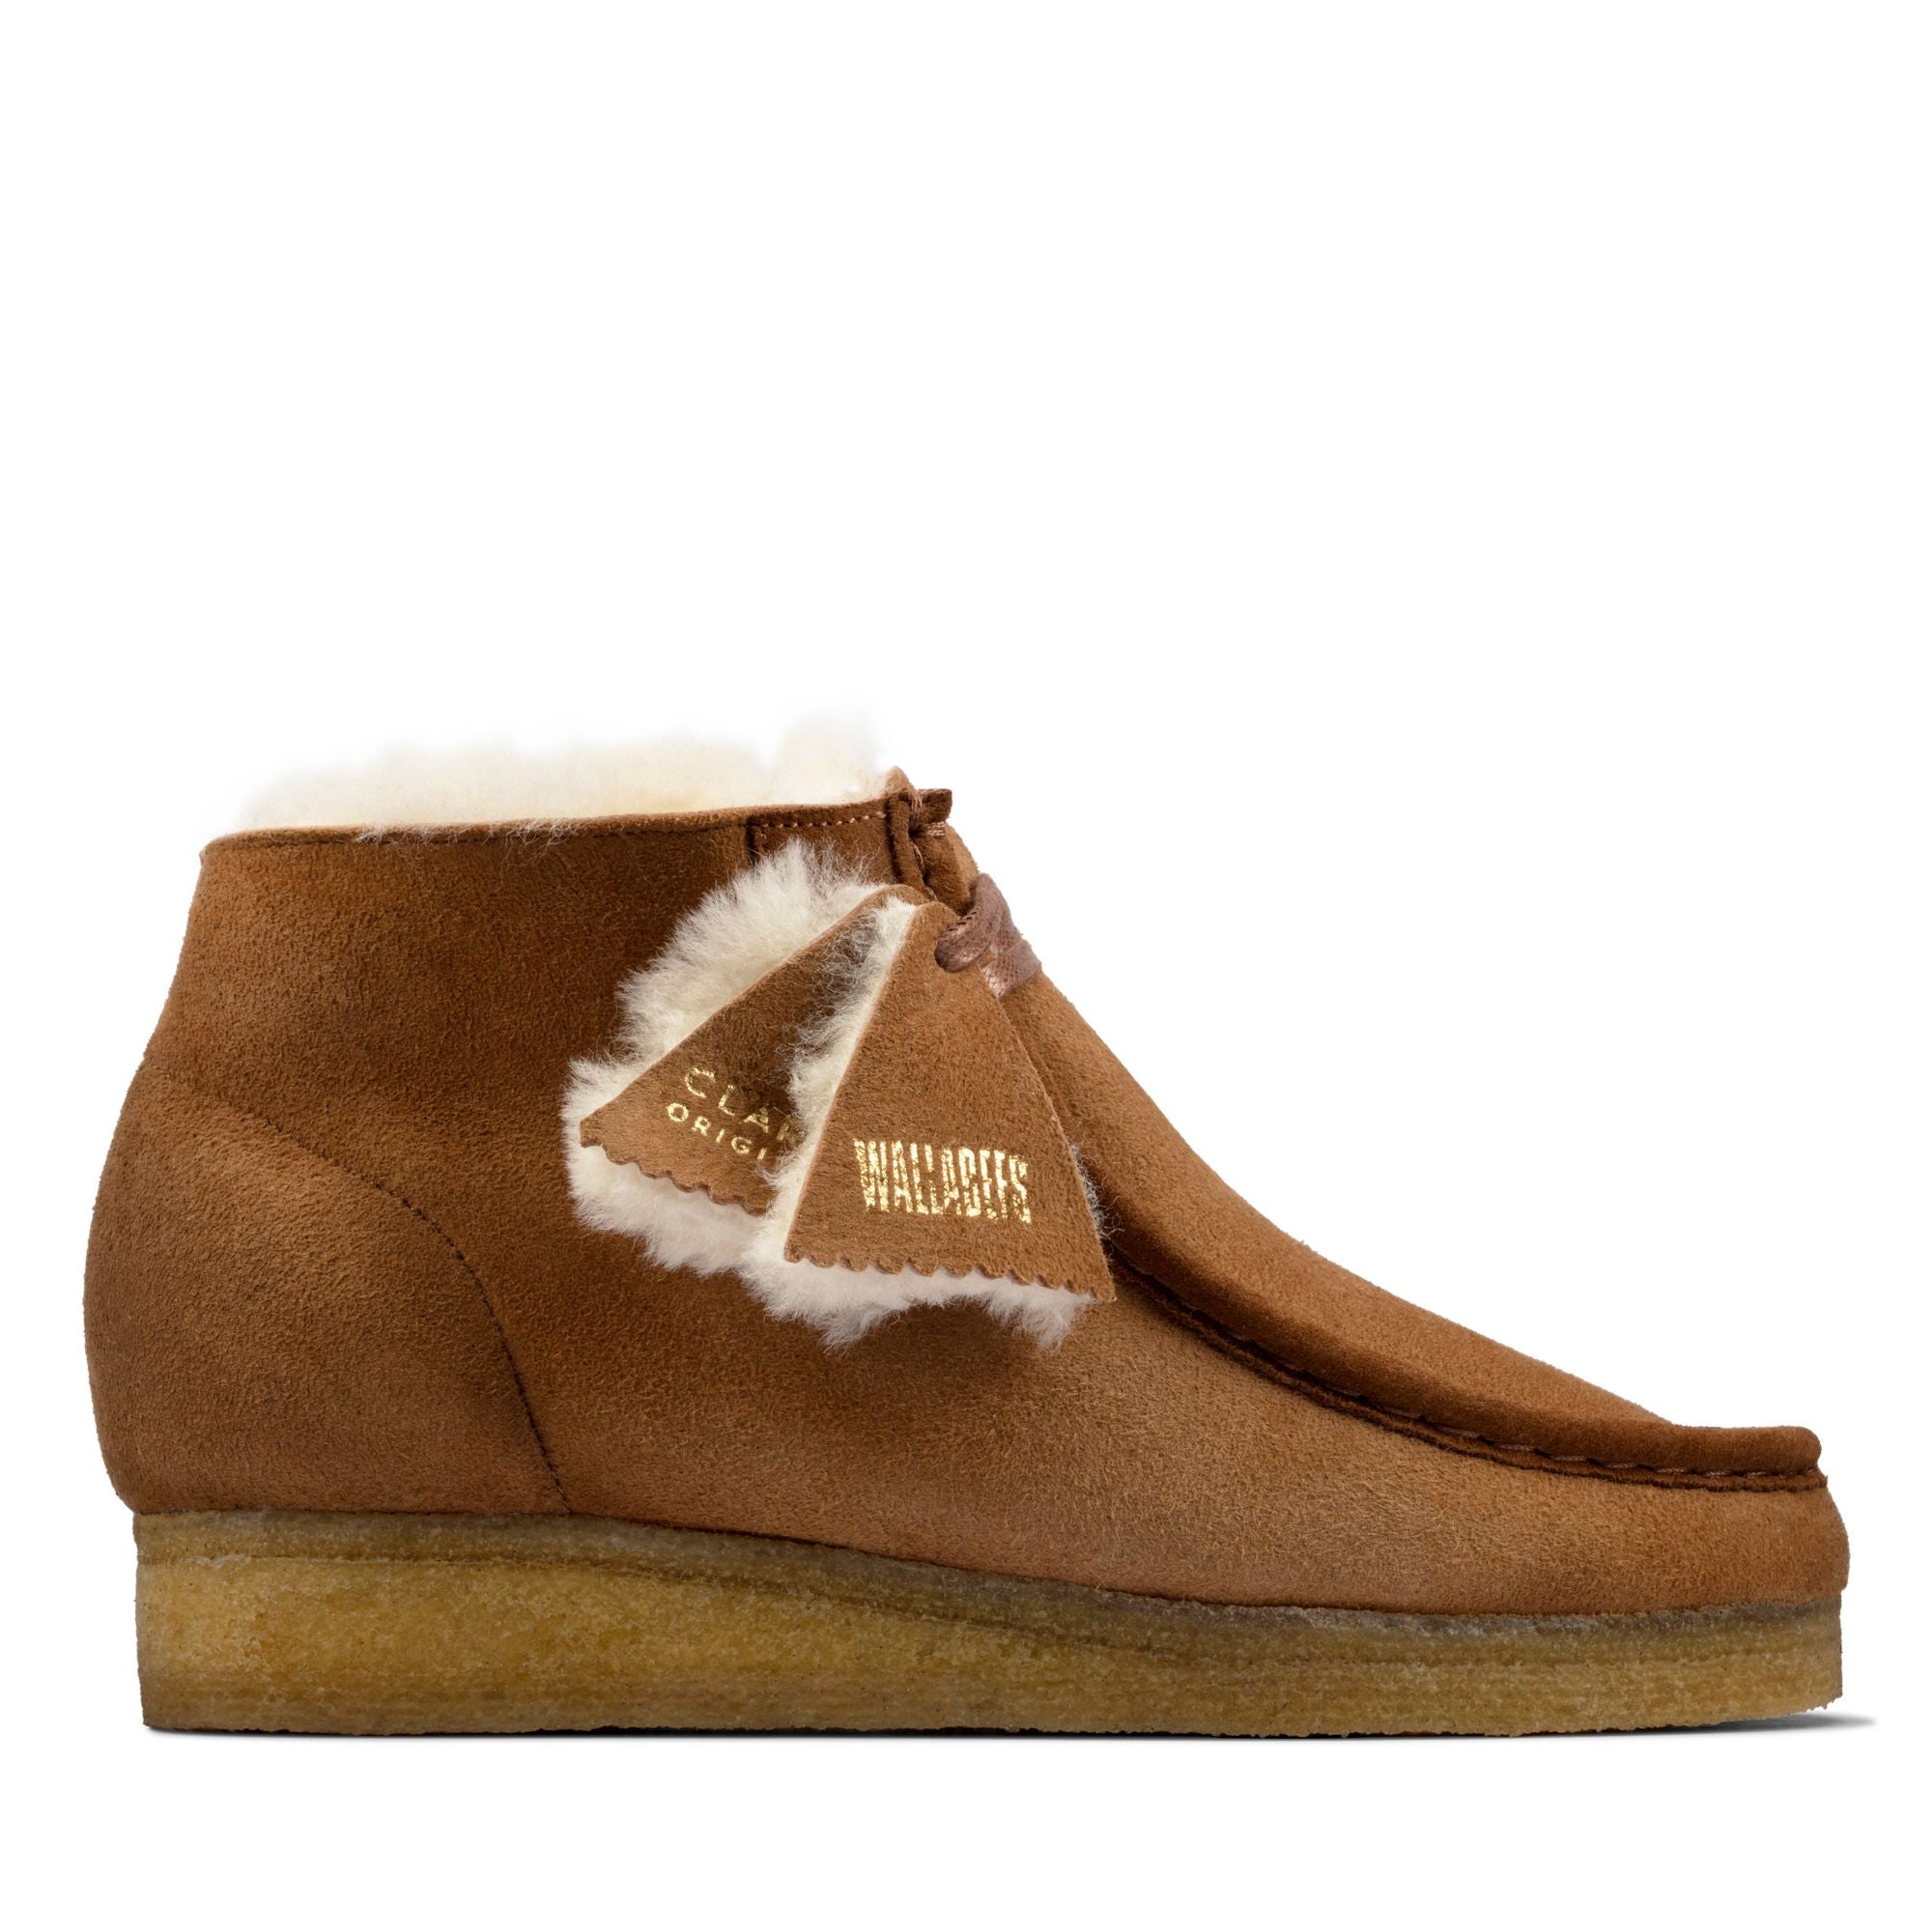 Clarks Women's Shearling Wallabee Boot with Lined Leather – Brand Co.